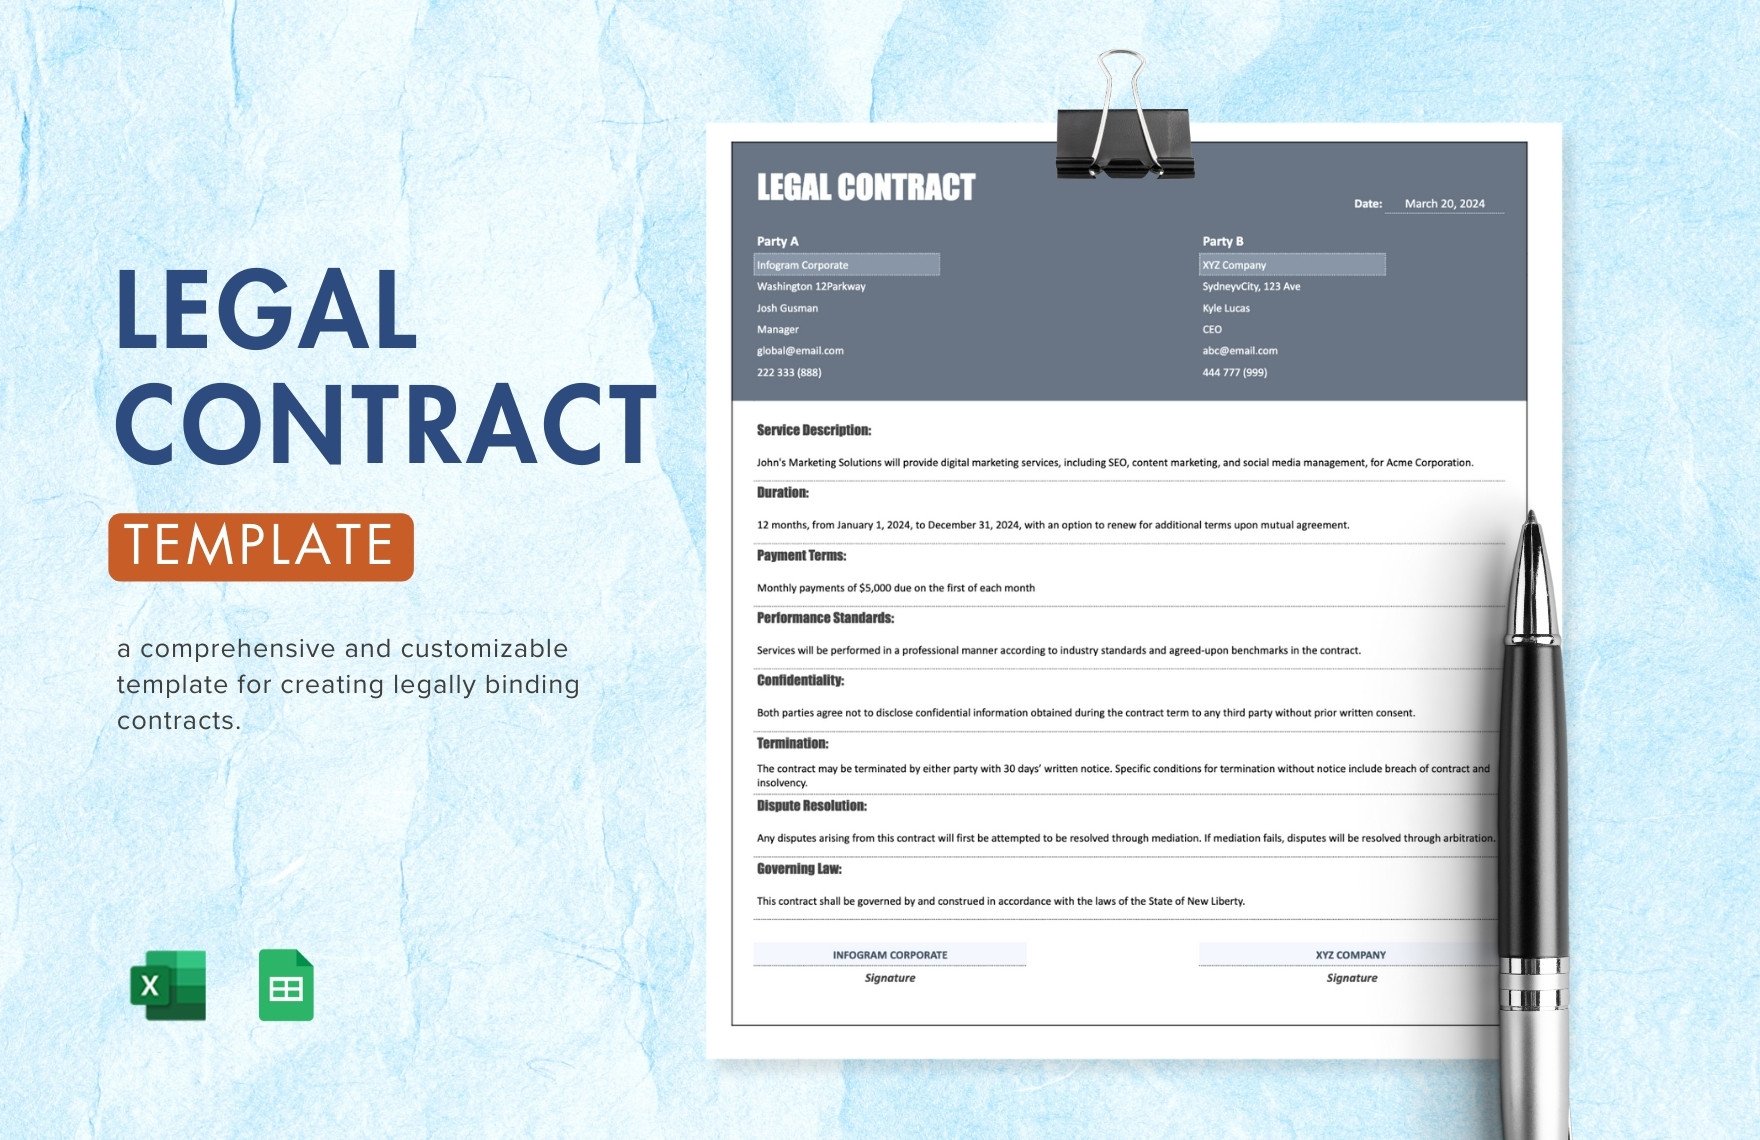 Legal Contract Template in Excel, Google Sheets